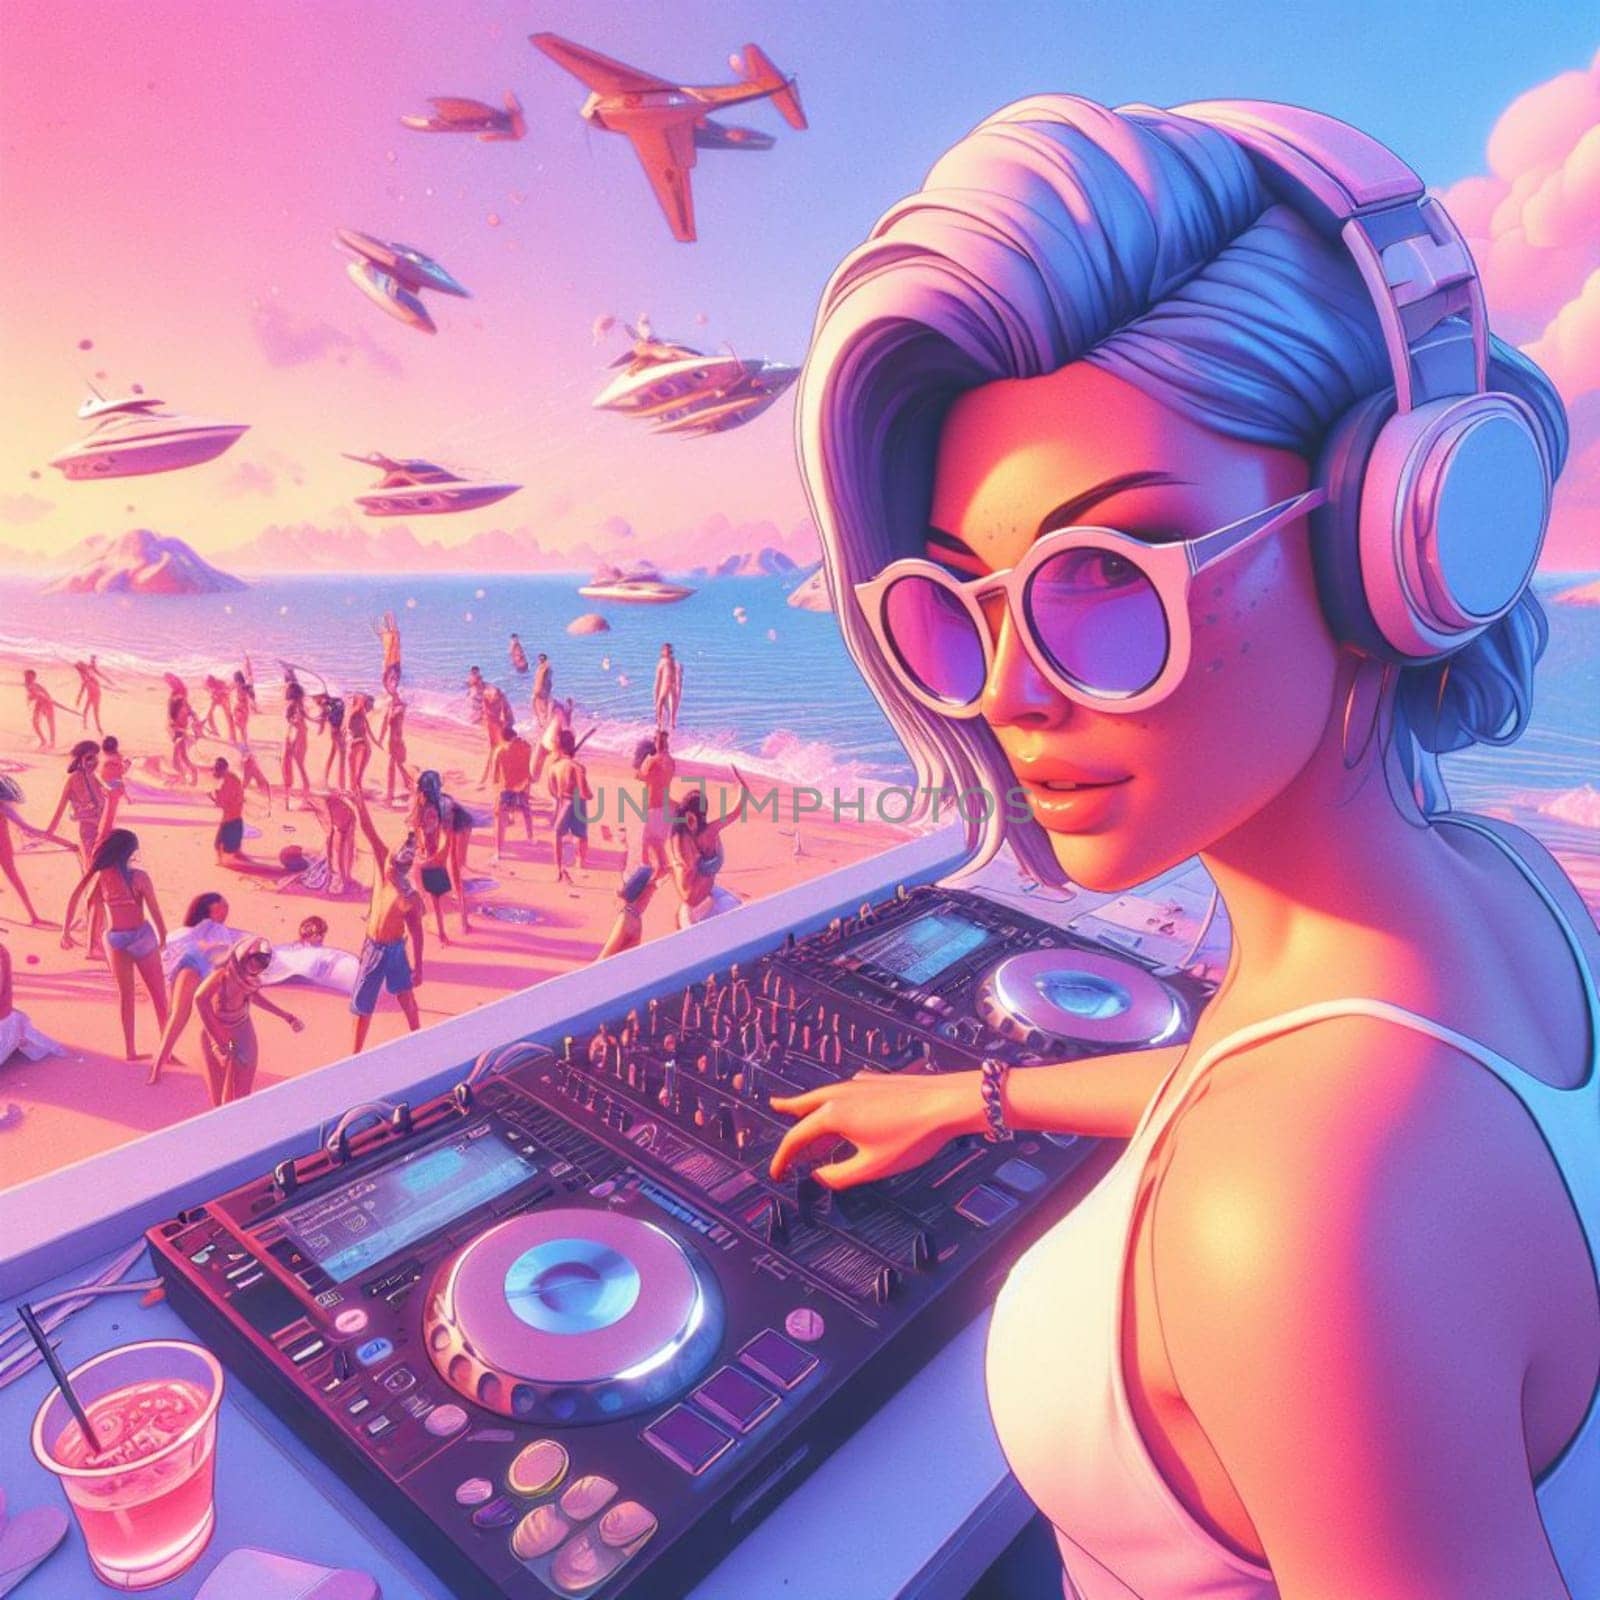 woman dj , wearing glasses earphone hosting dj set at crowded beach party in tropical island sunset by verbano